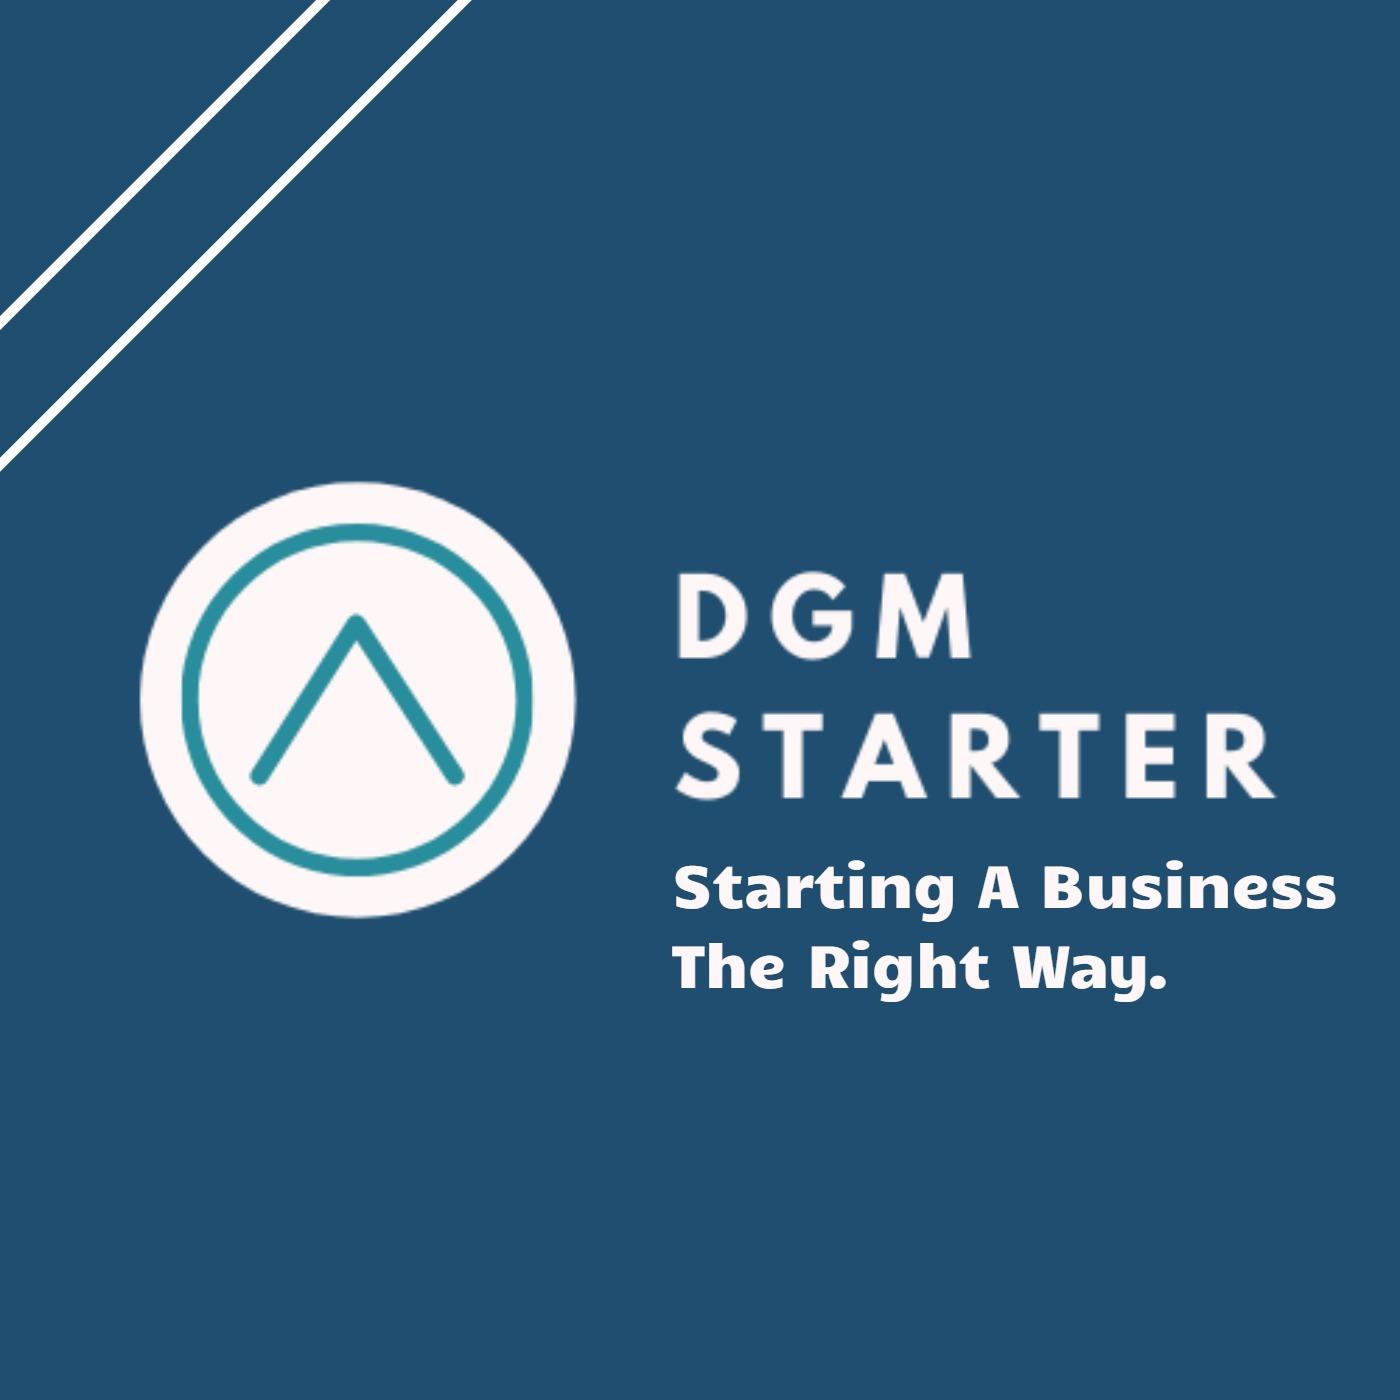 DGM Starter | Starting A Business The Right Way